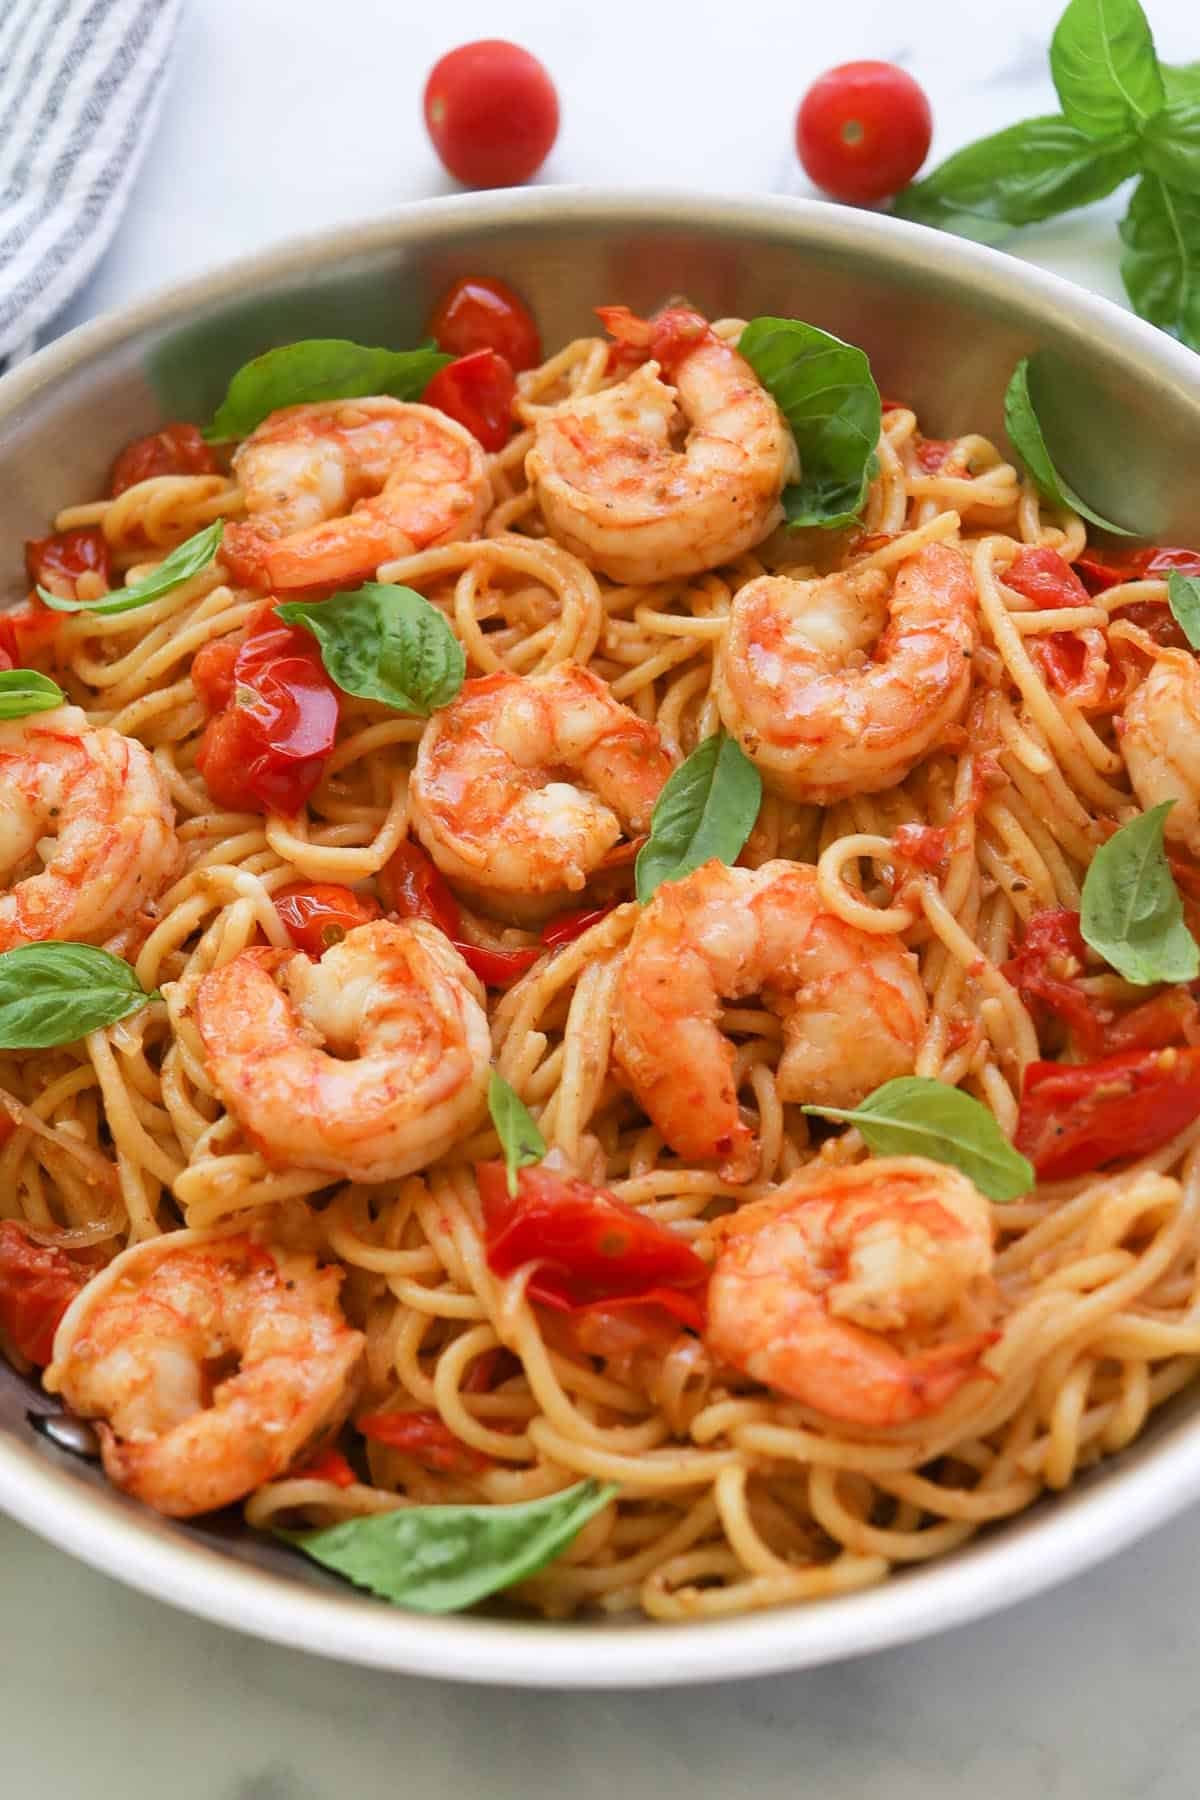 Shrimp pasta with cherry tomatoes and basil on plate.